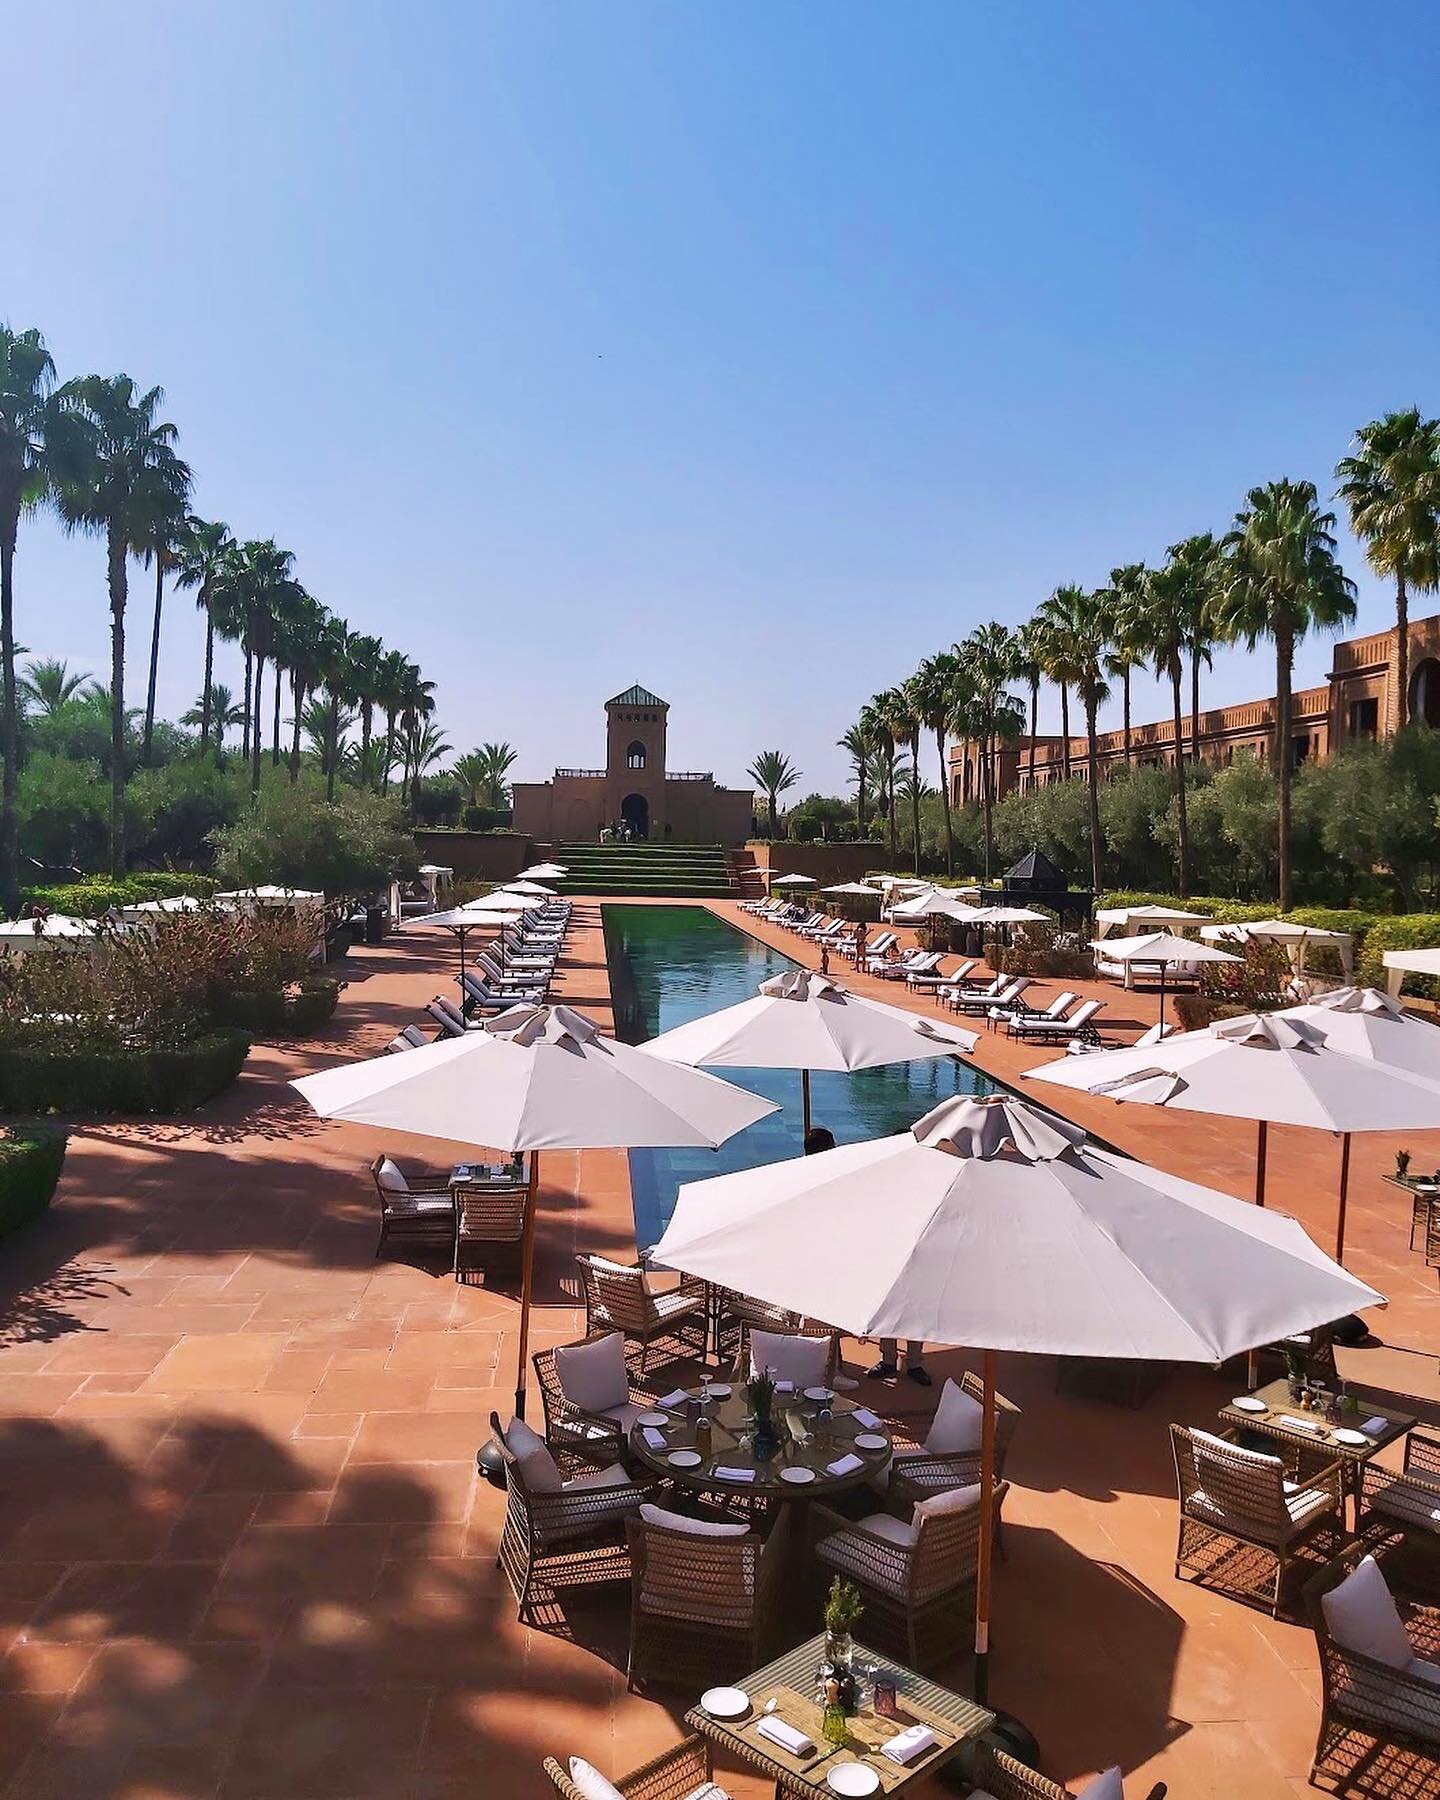 I have had the absolute pleasure of spending some time scouring the most exceptional addresses for  hosting your destination wedding weekend celebration in Marrakech.

Included in the round-up is this luxurious hotel, renowned for its distinctive eve